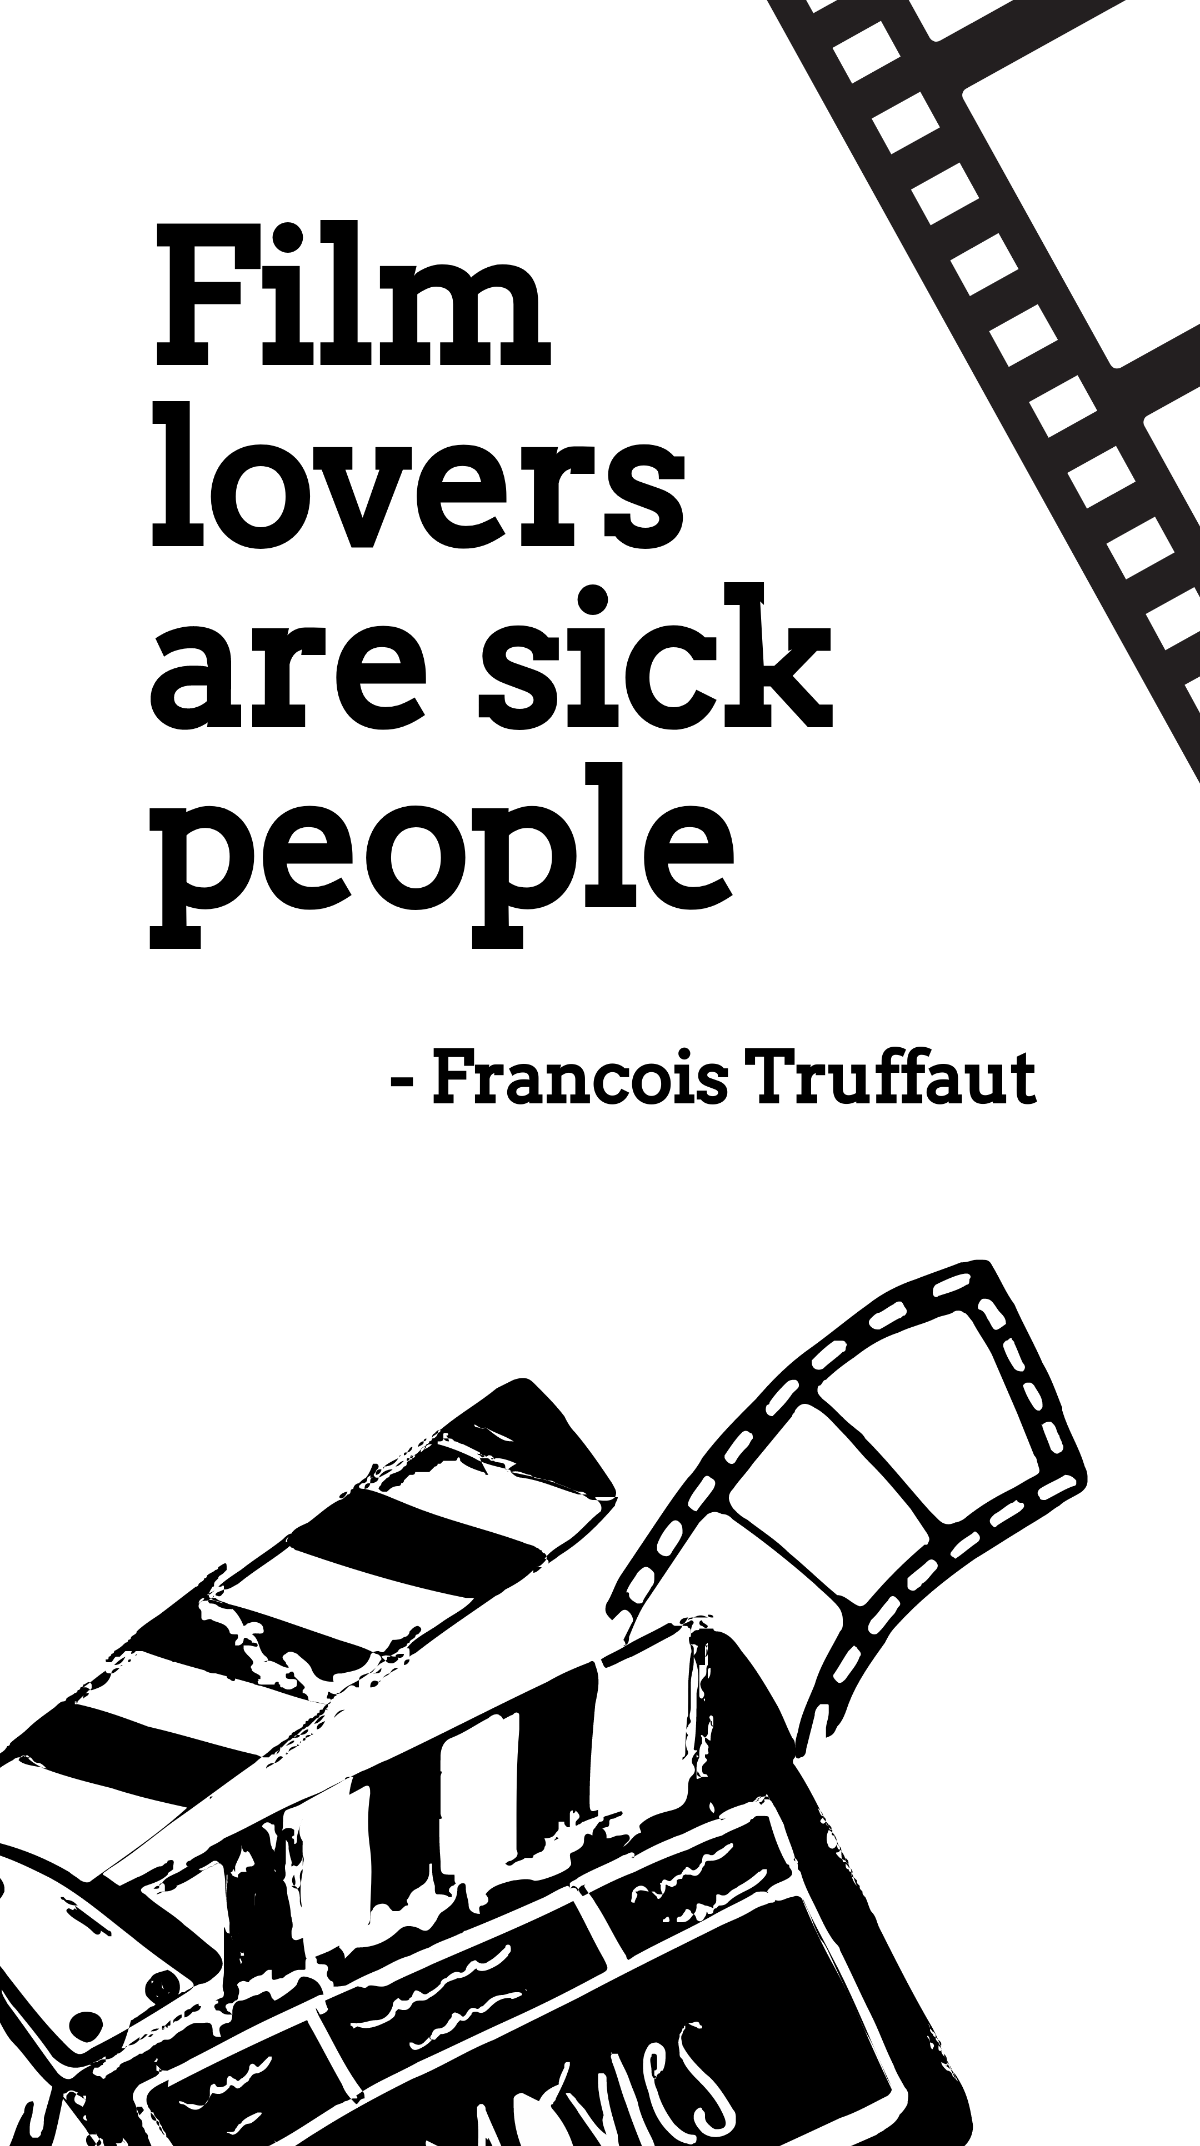 Free Francois Truffaut - Film lovers are sick people Template